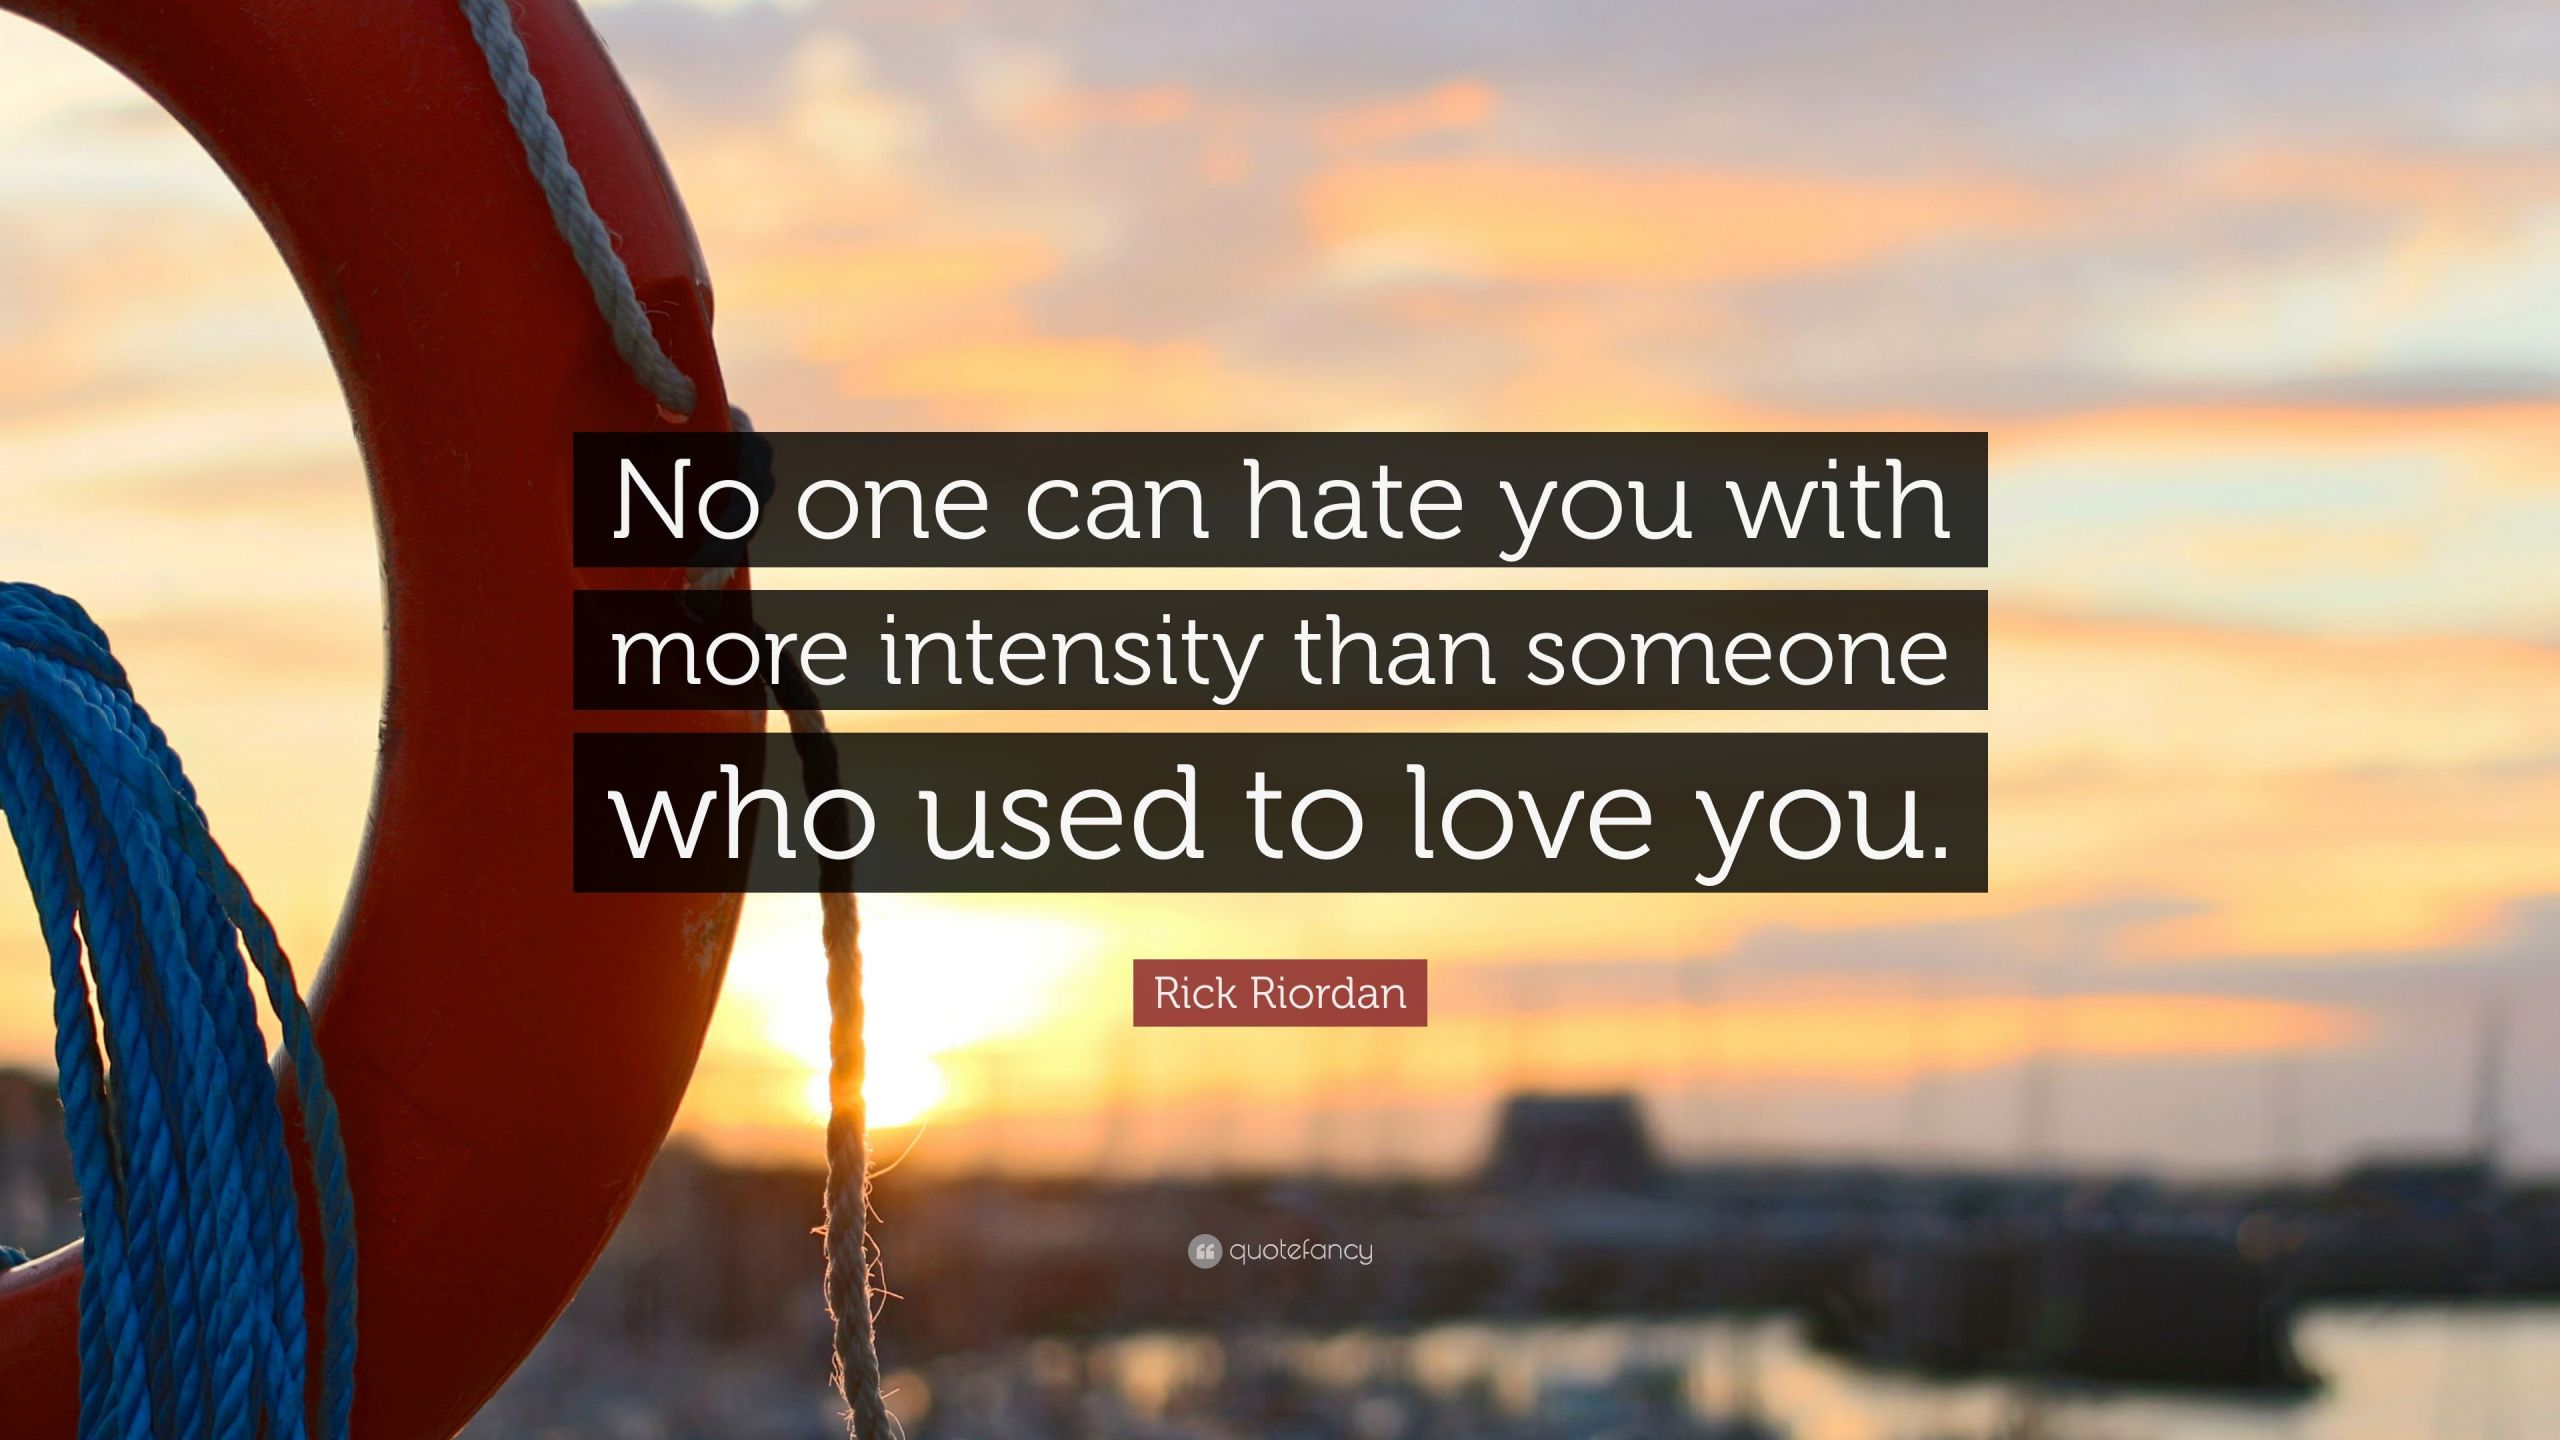 Quotes About Hating Someone You Used To Love
 Rick Riordan Quote “No one can hate you with more